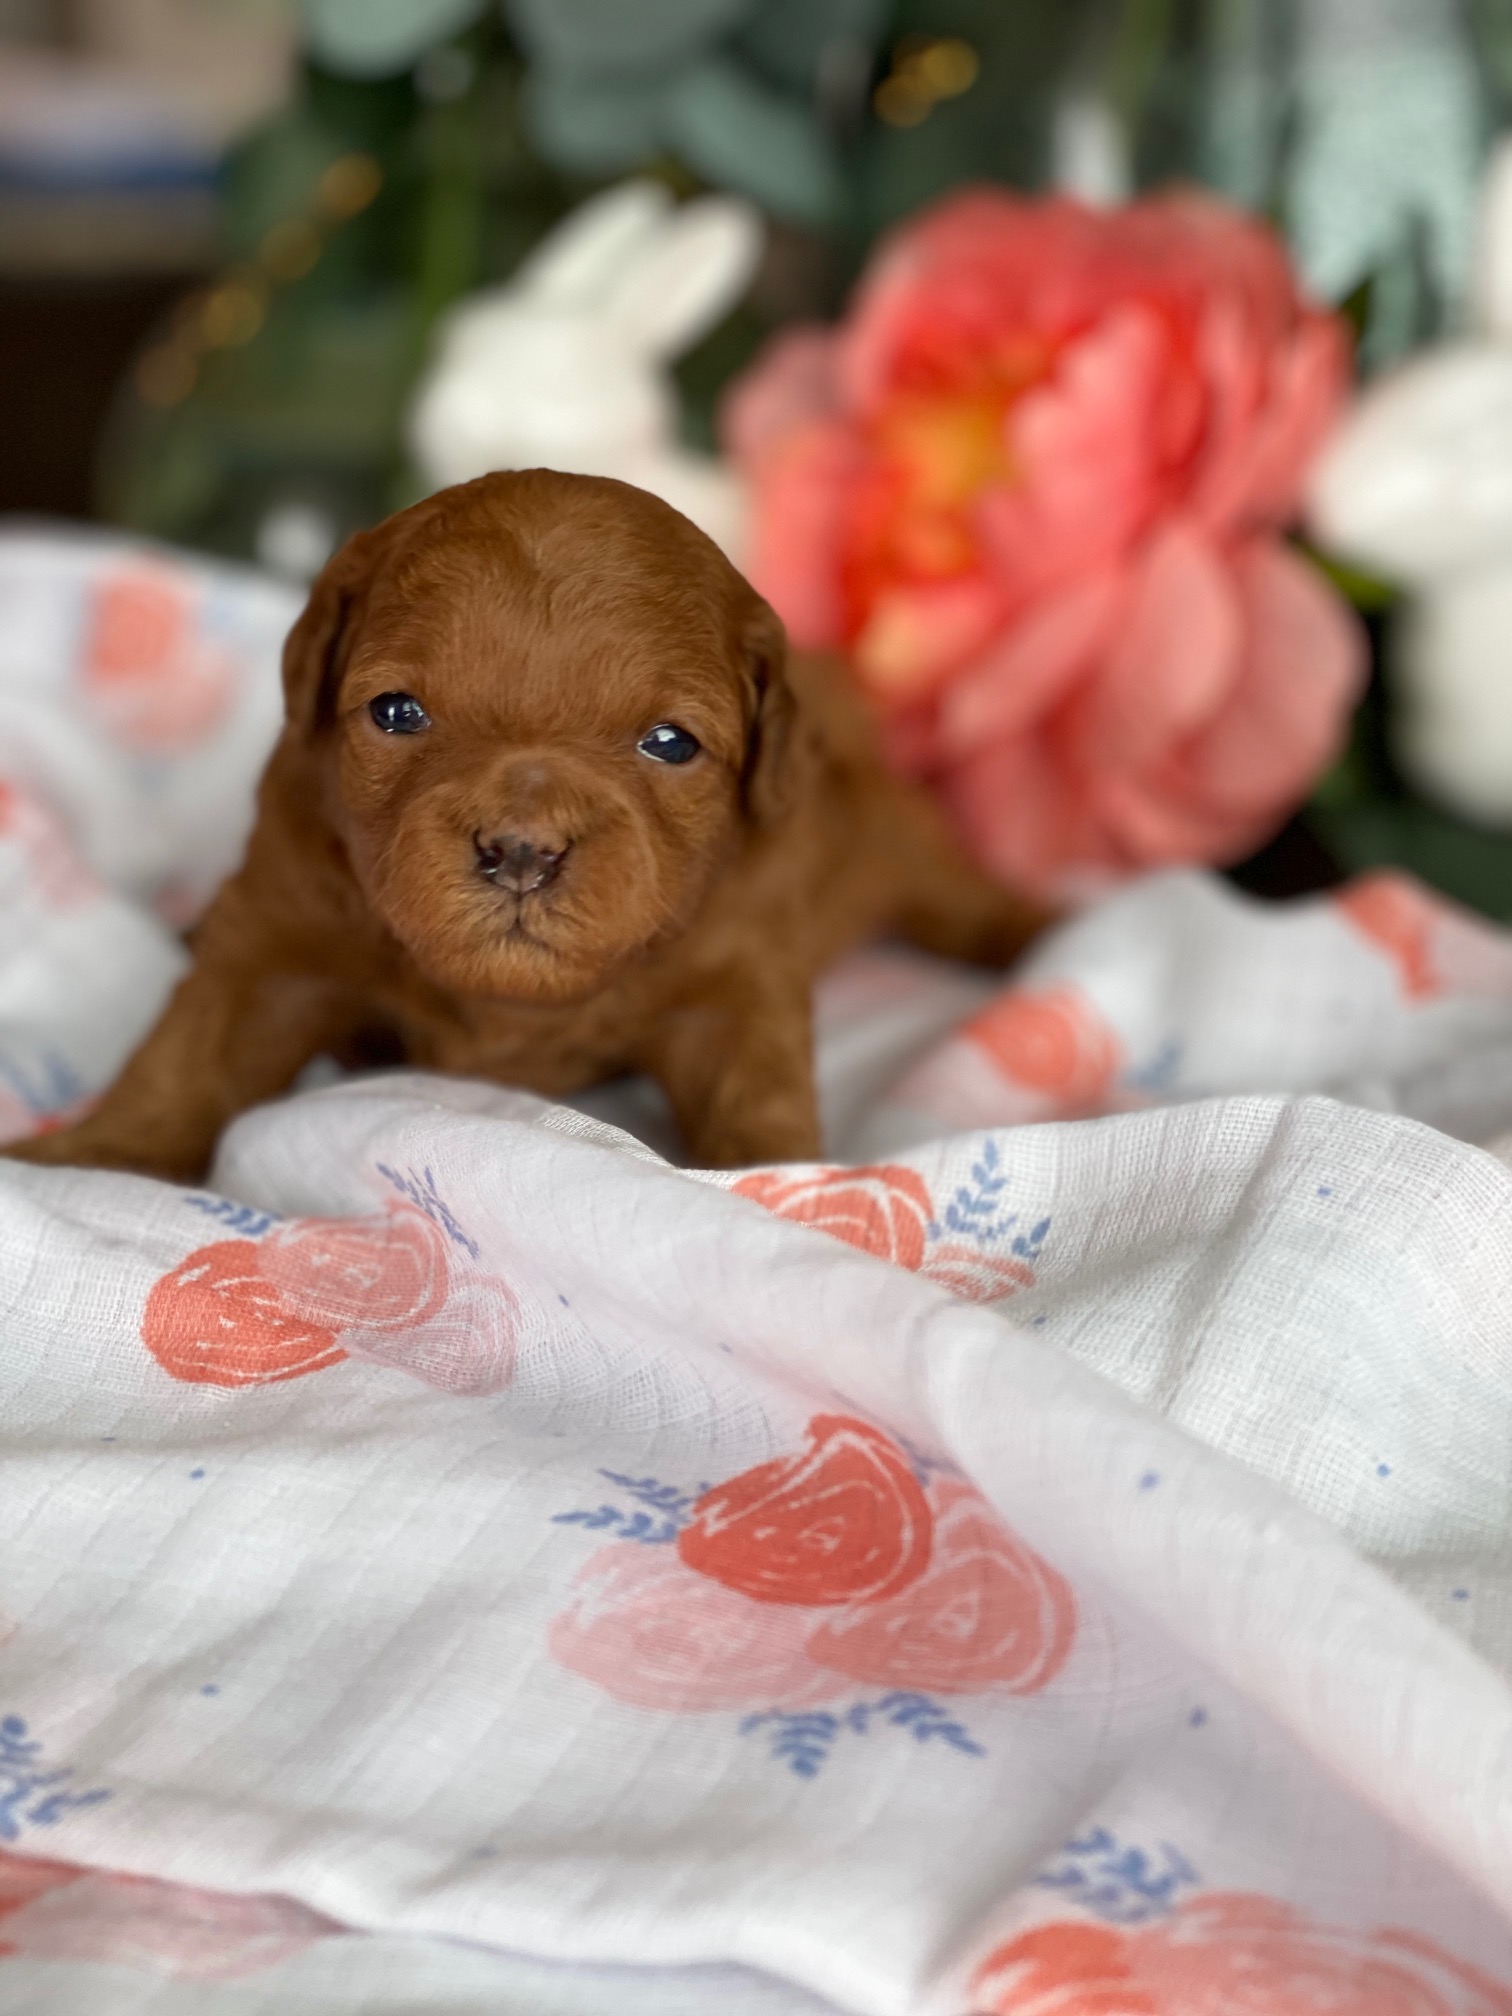 A small brown puppy peacefully rests on a floral blanket, surrounded by delicate flowers.